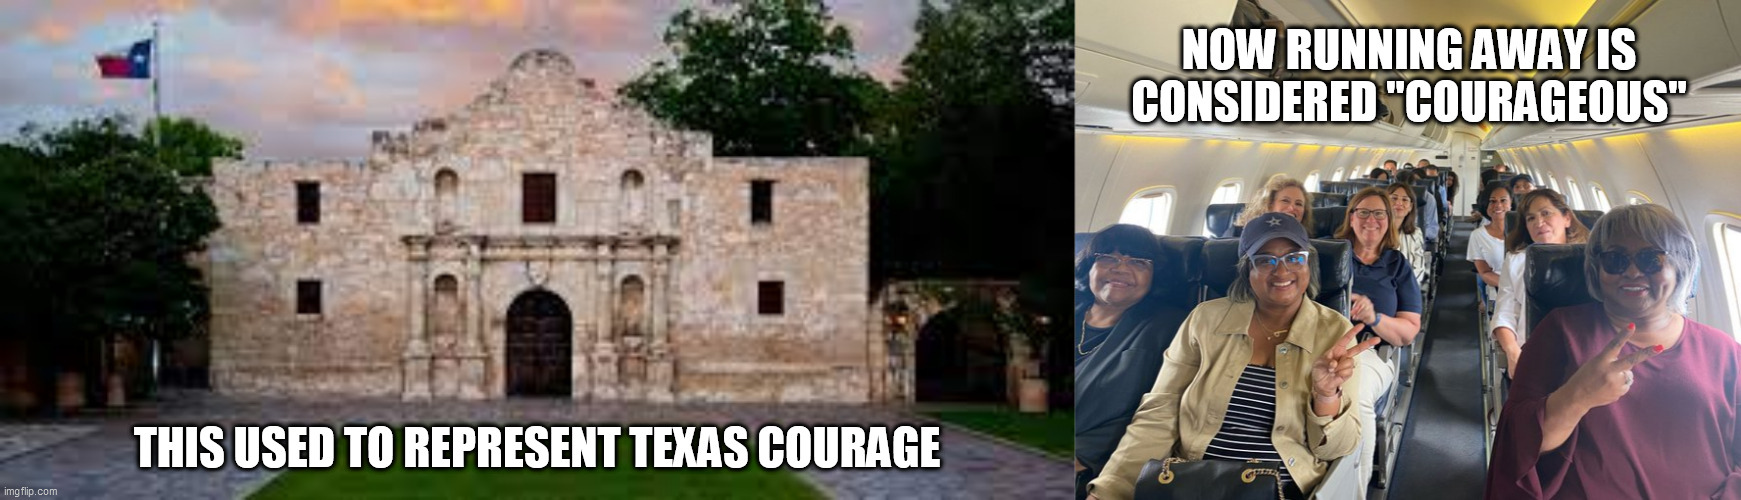 Texas Democrat Cowards | NOW RUNNING AWAY IS CONSIDERED "COURAGEOUS"; THIS USED TO REPRESENT TEXAS COURAGE | image tagged in texas democrats,cowardly democrats,texas alamo,vote integrity matters,texas cowards,define democrats | made w/ Imgflip meme maker